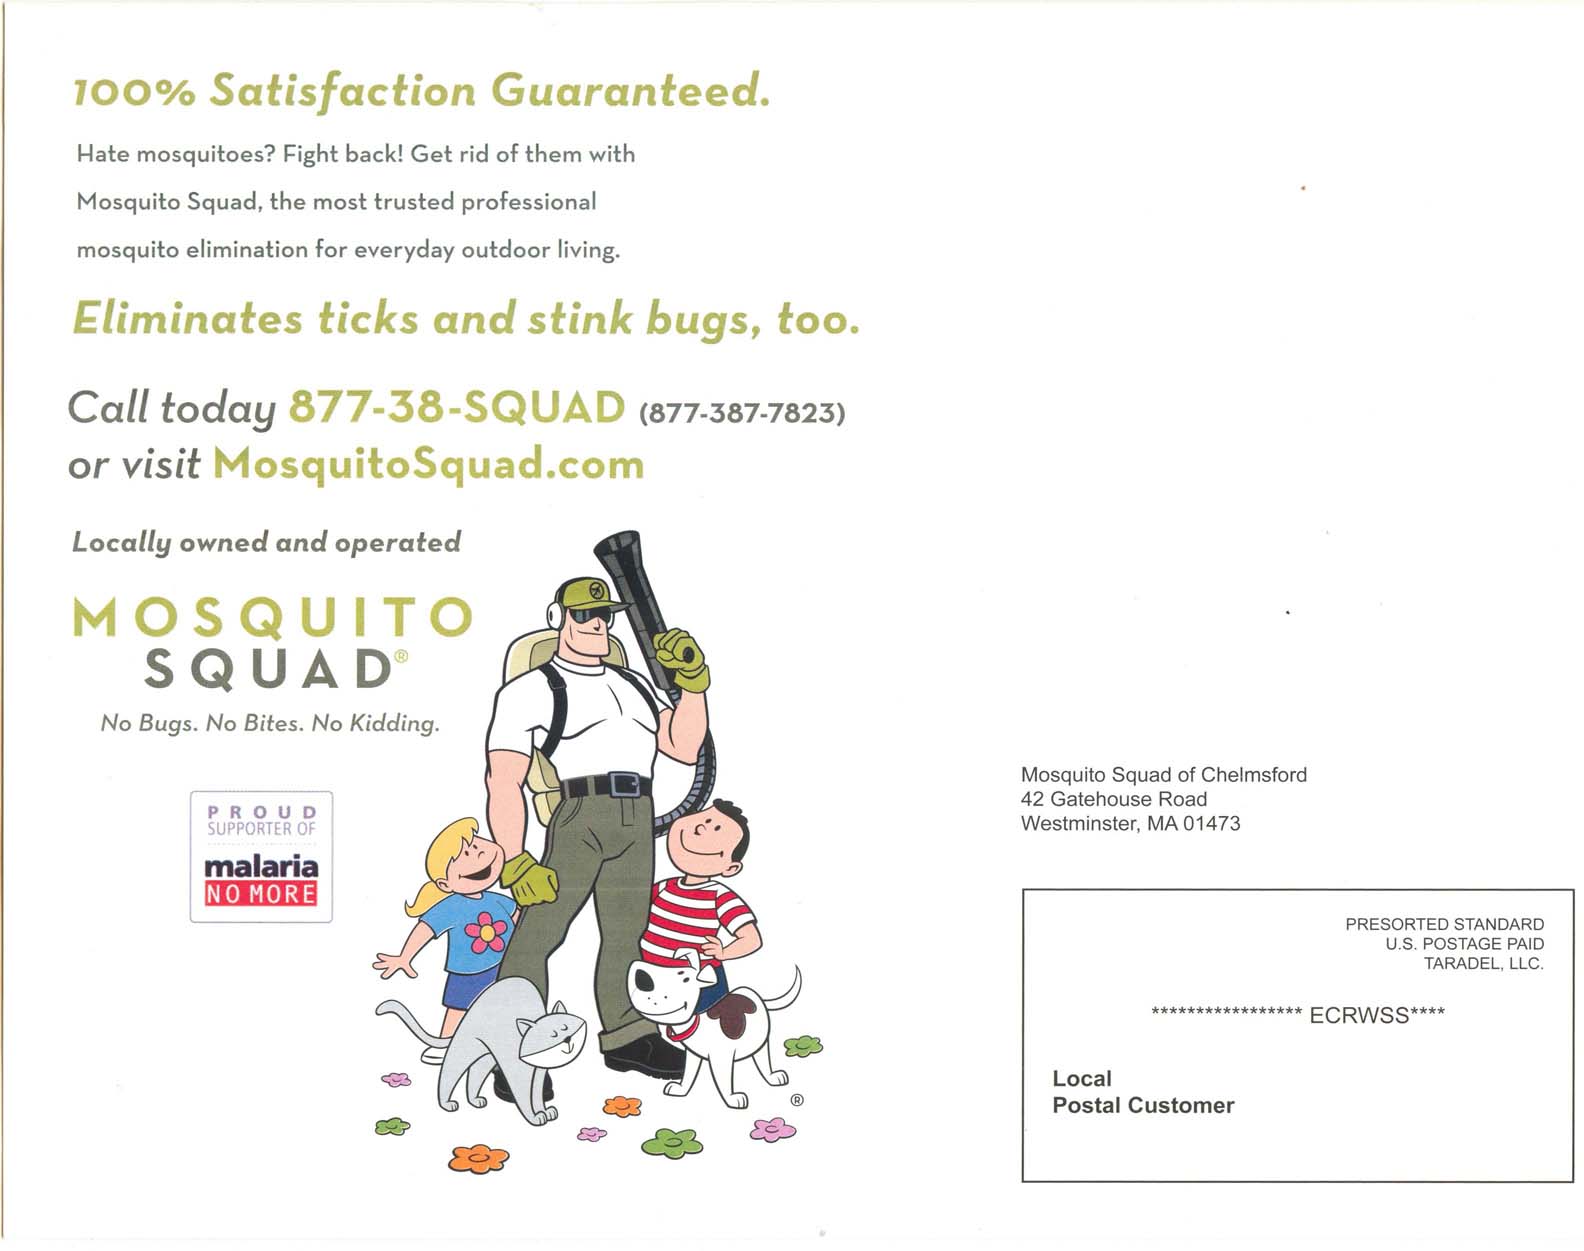 Mosquito Squad Oversized Post Card 2013 - Back